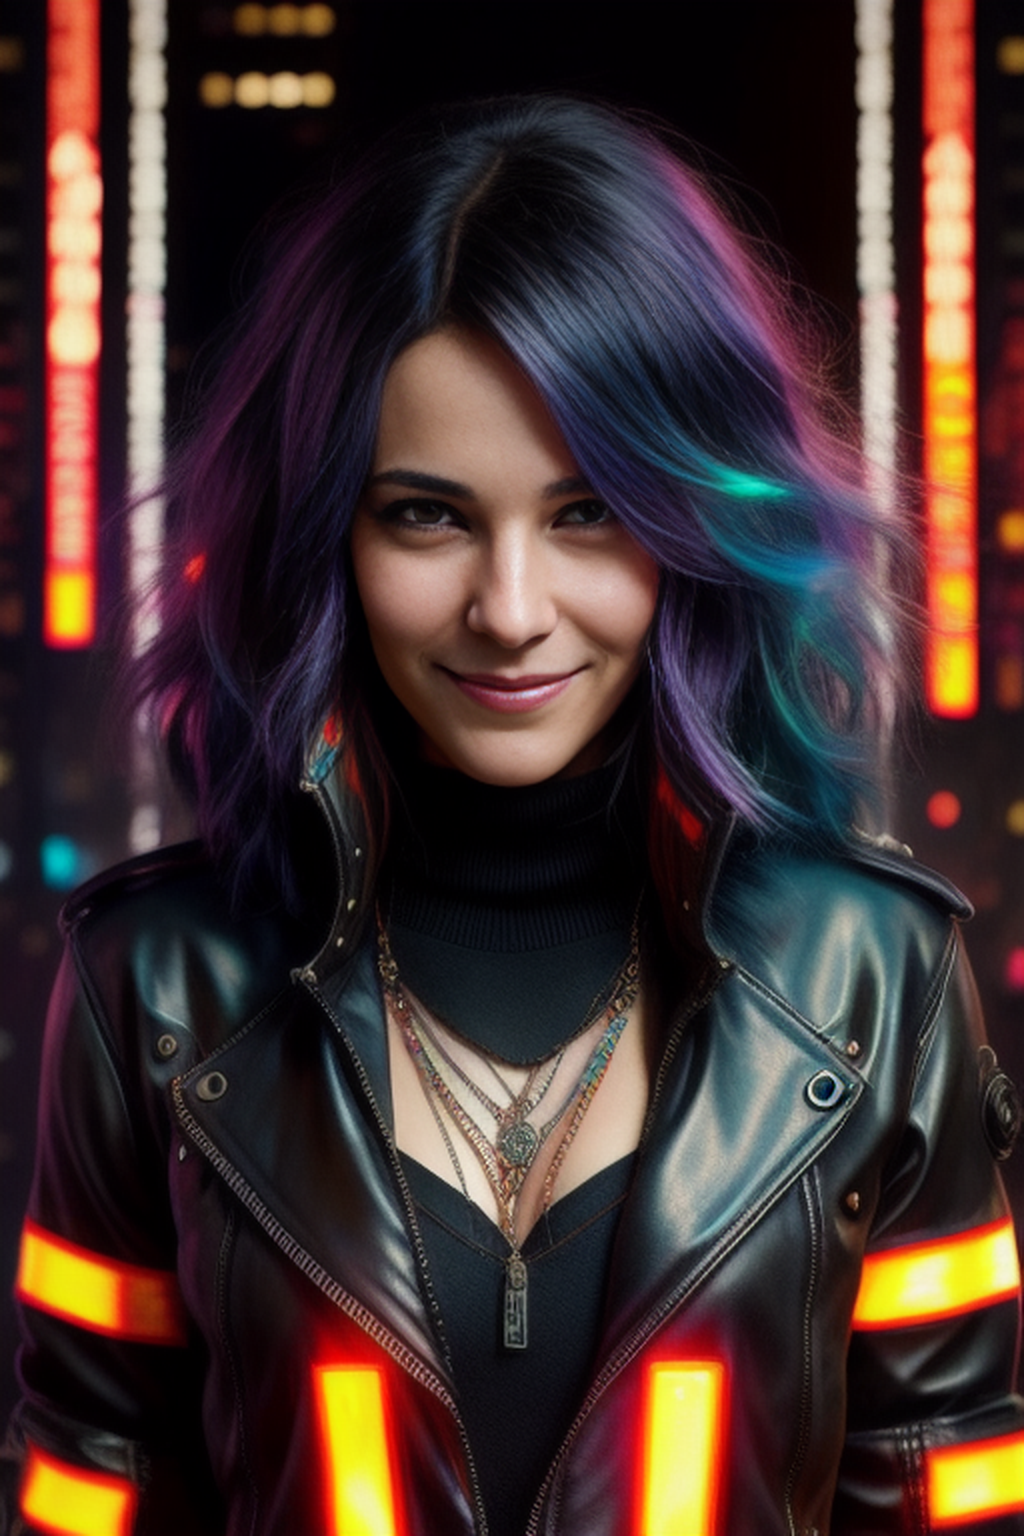 Close-up portrait of a young woman with purple hair and a leather jacket.